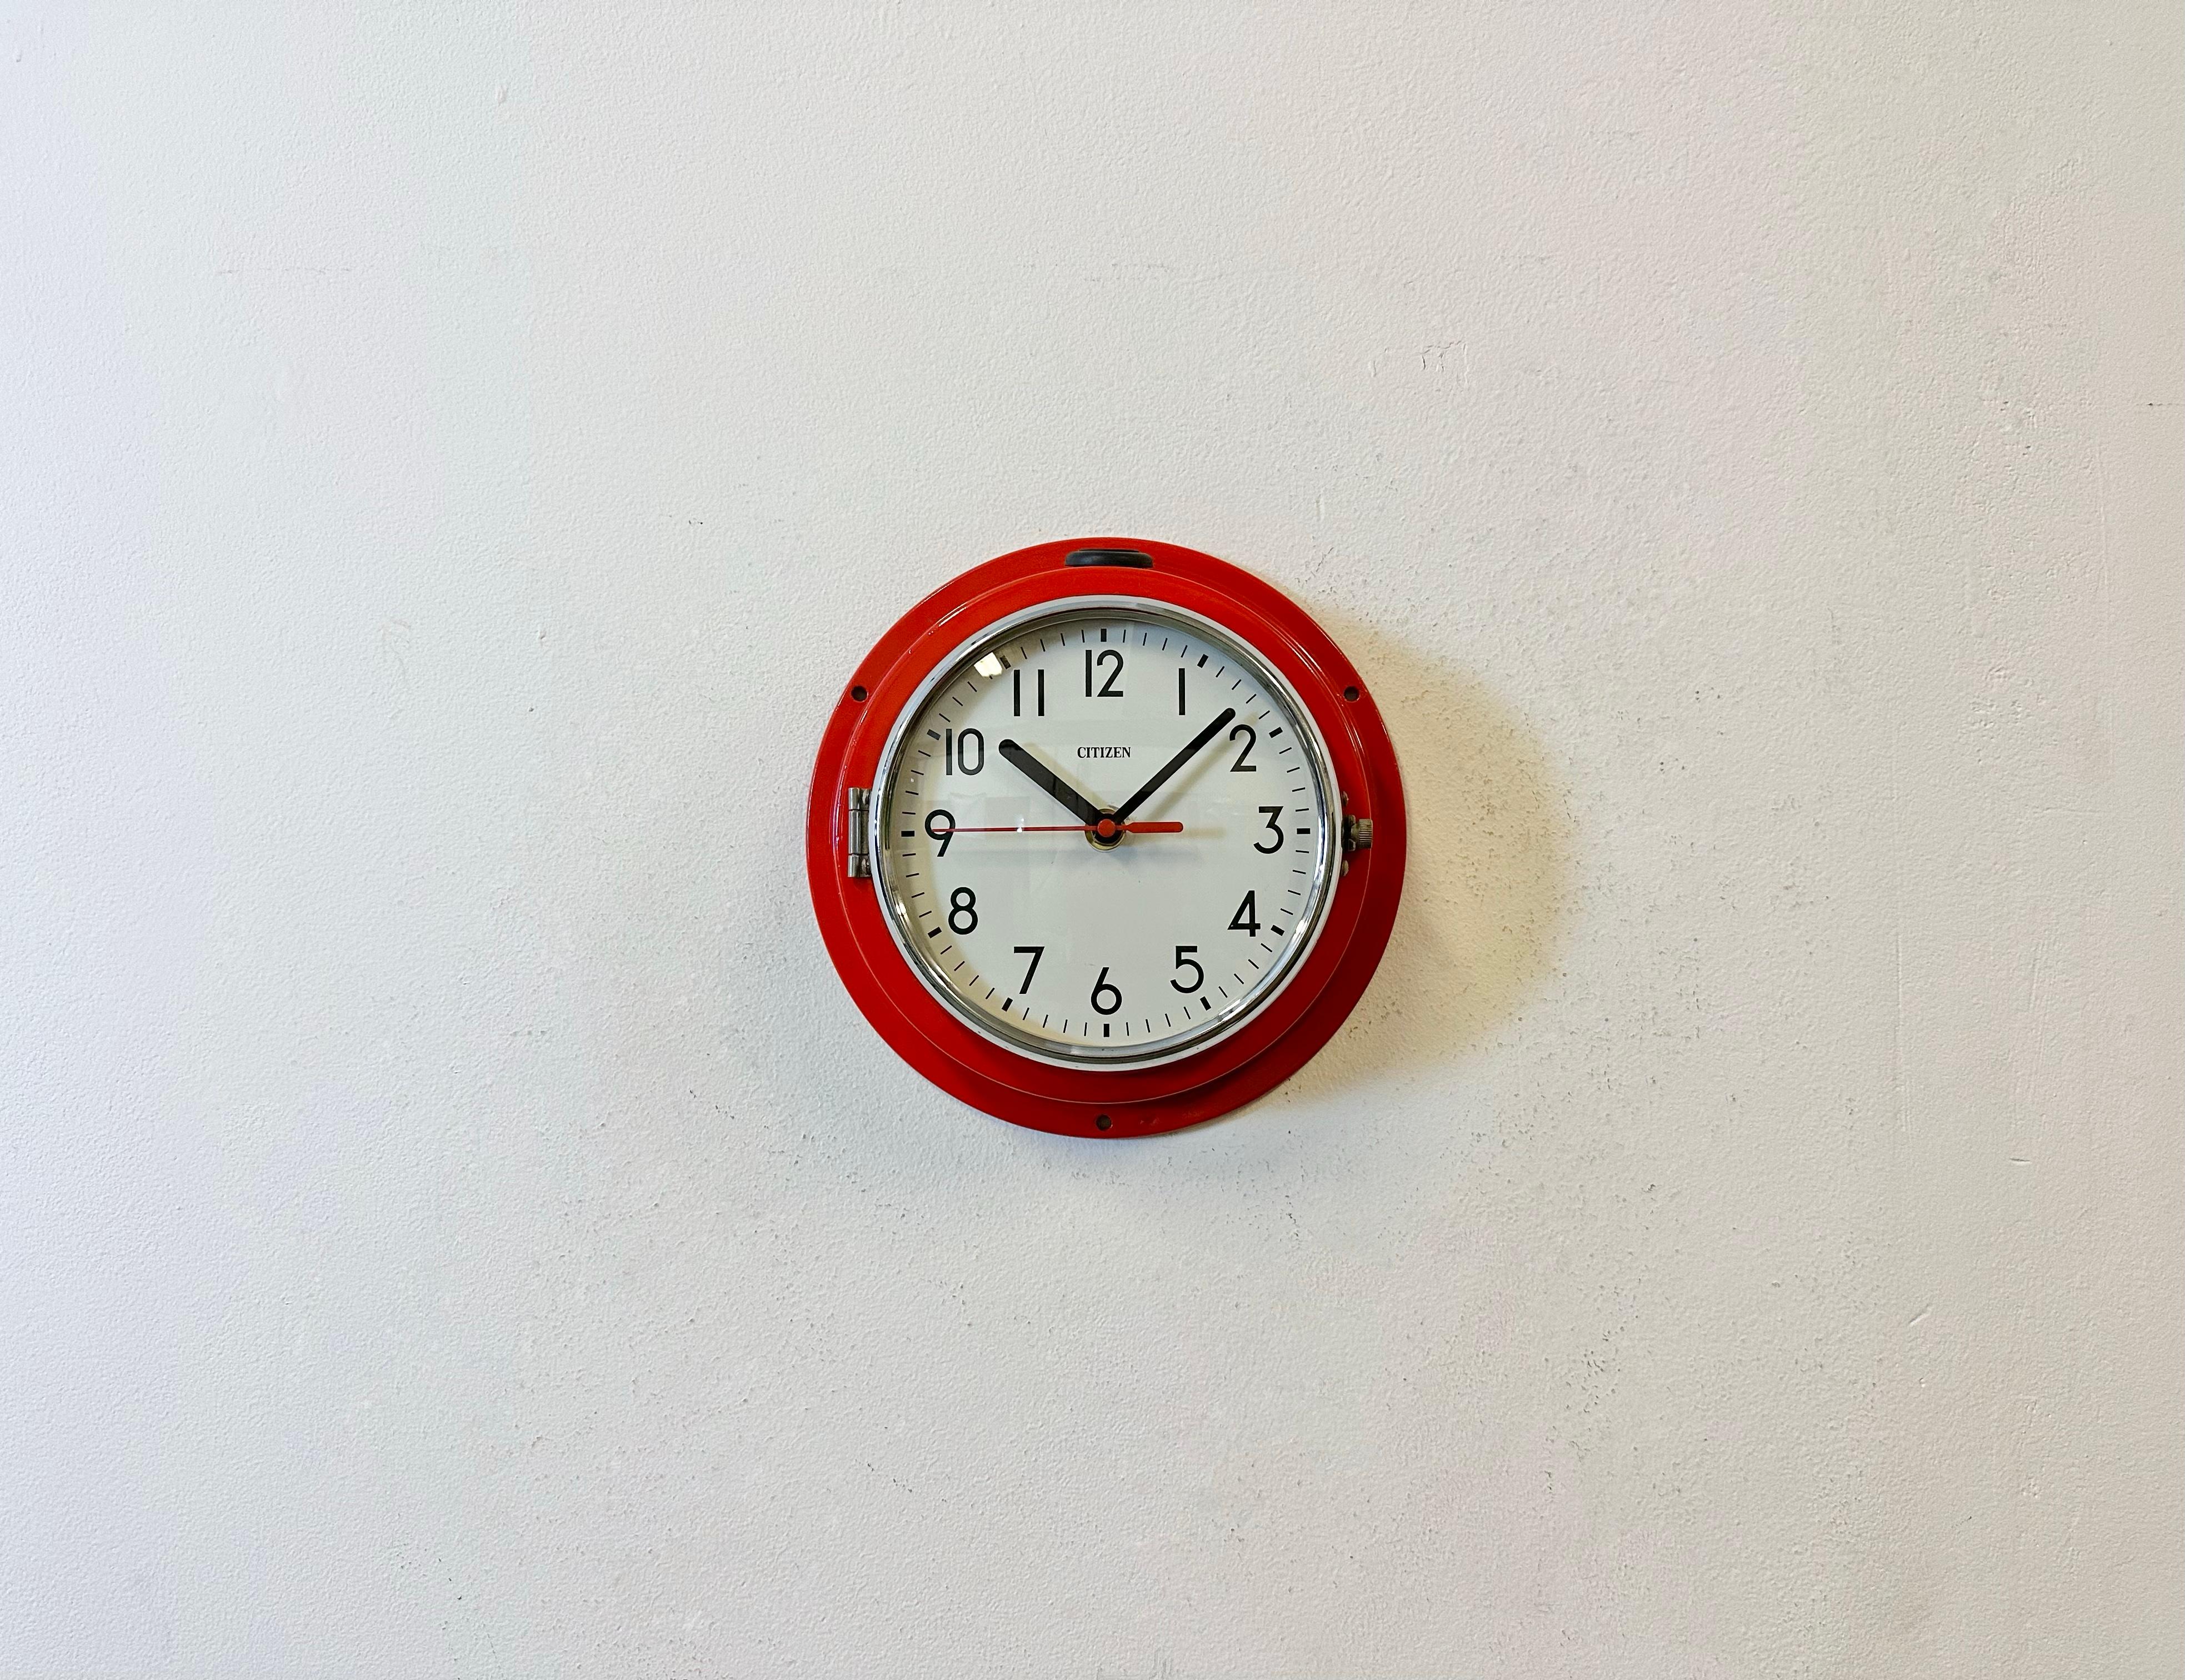 Vintage Citizen maritime slave clock designed during the 1970s and produced till 1990s. These clocks were used on large Japanese tankers and cargo ships. It features a red iron body, a metal dial and curved clear glass cover. This item has been